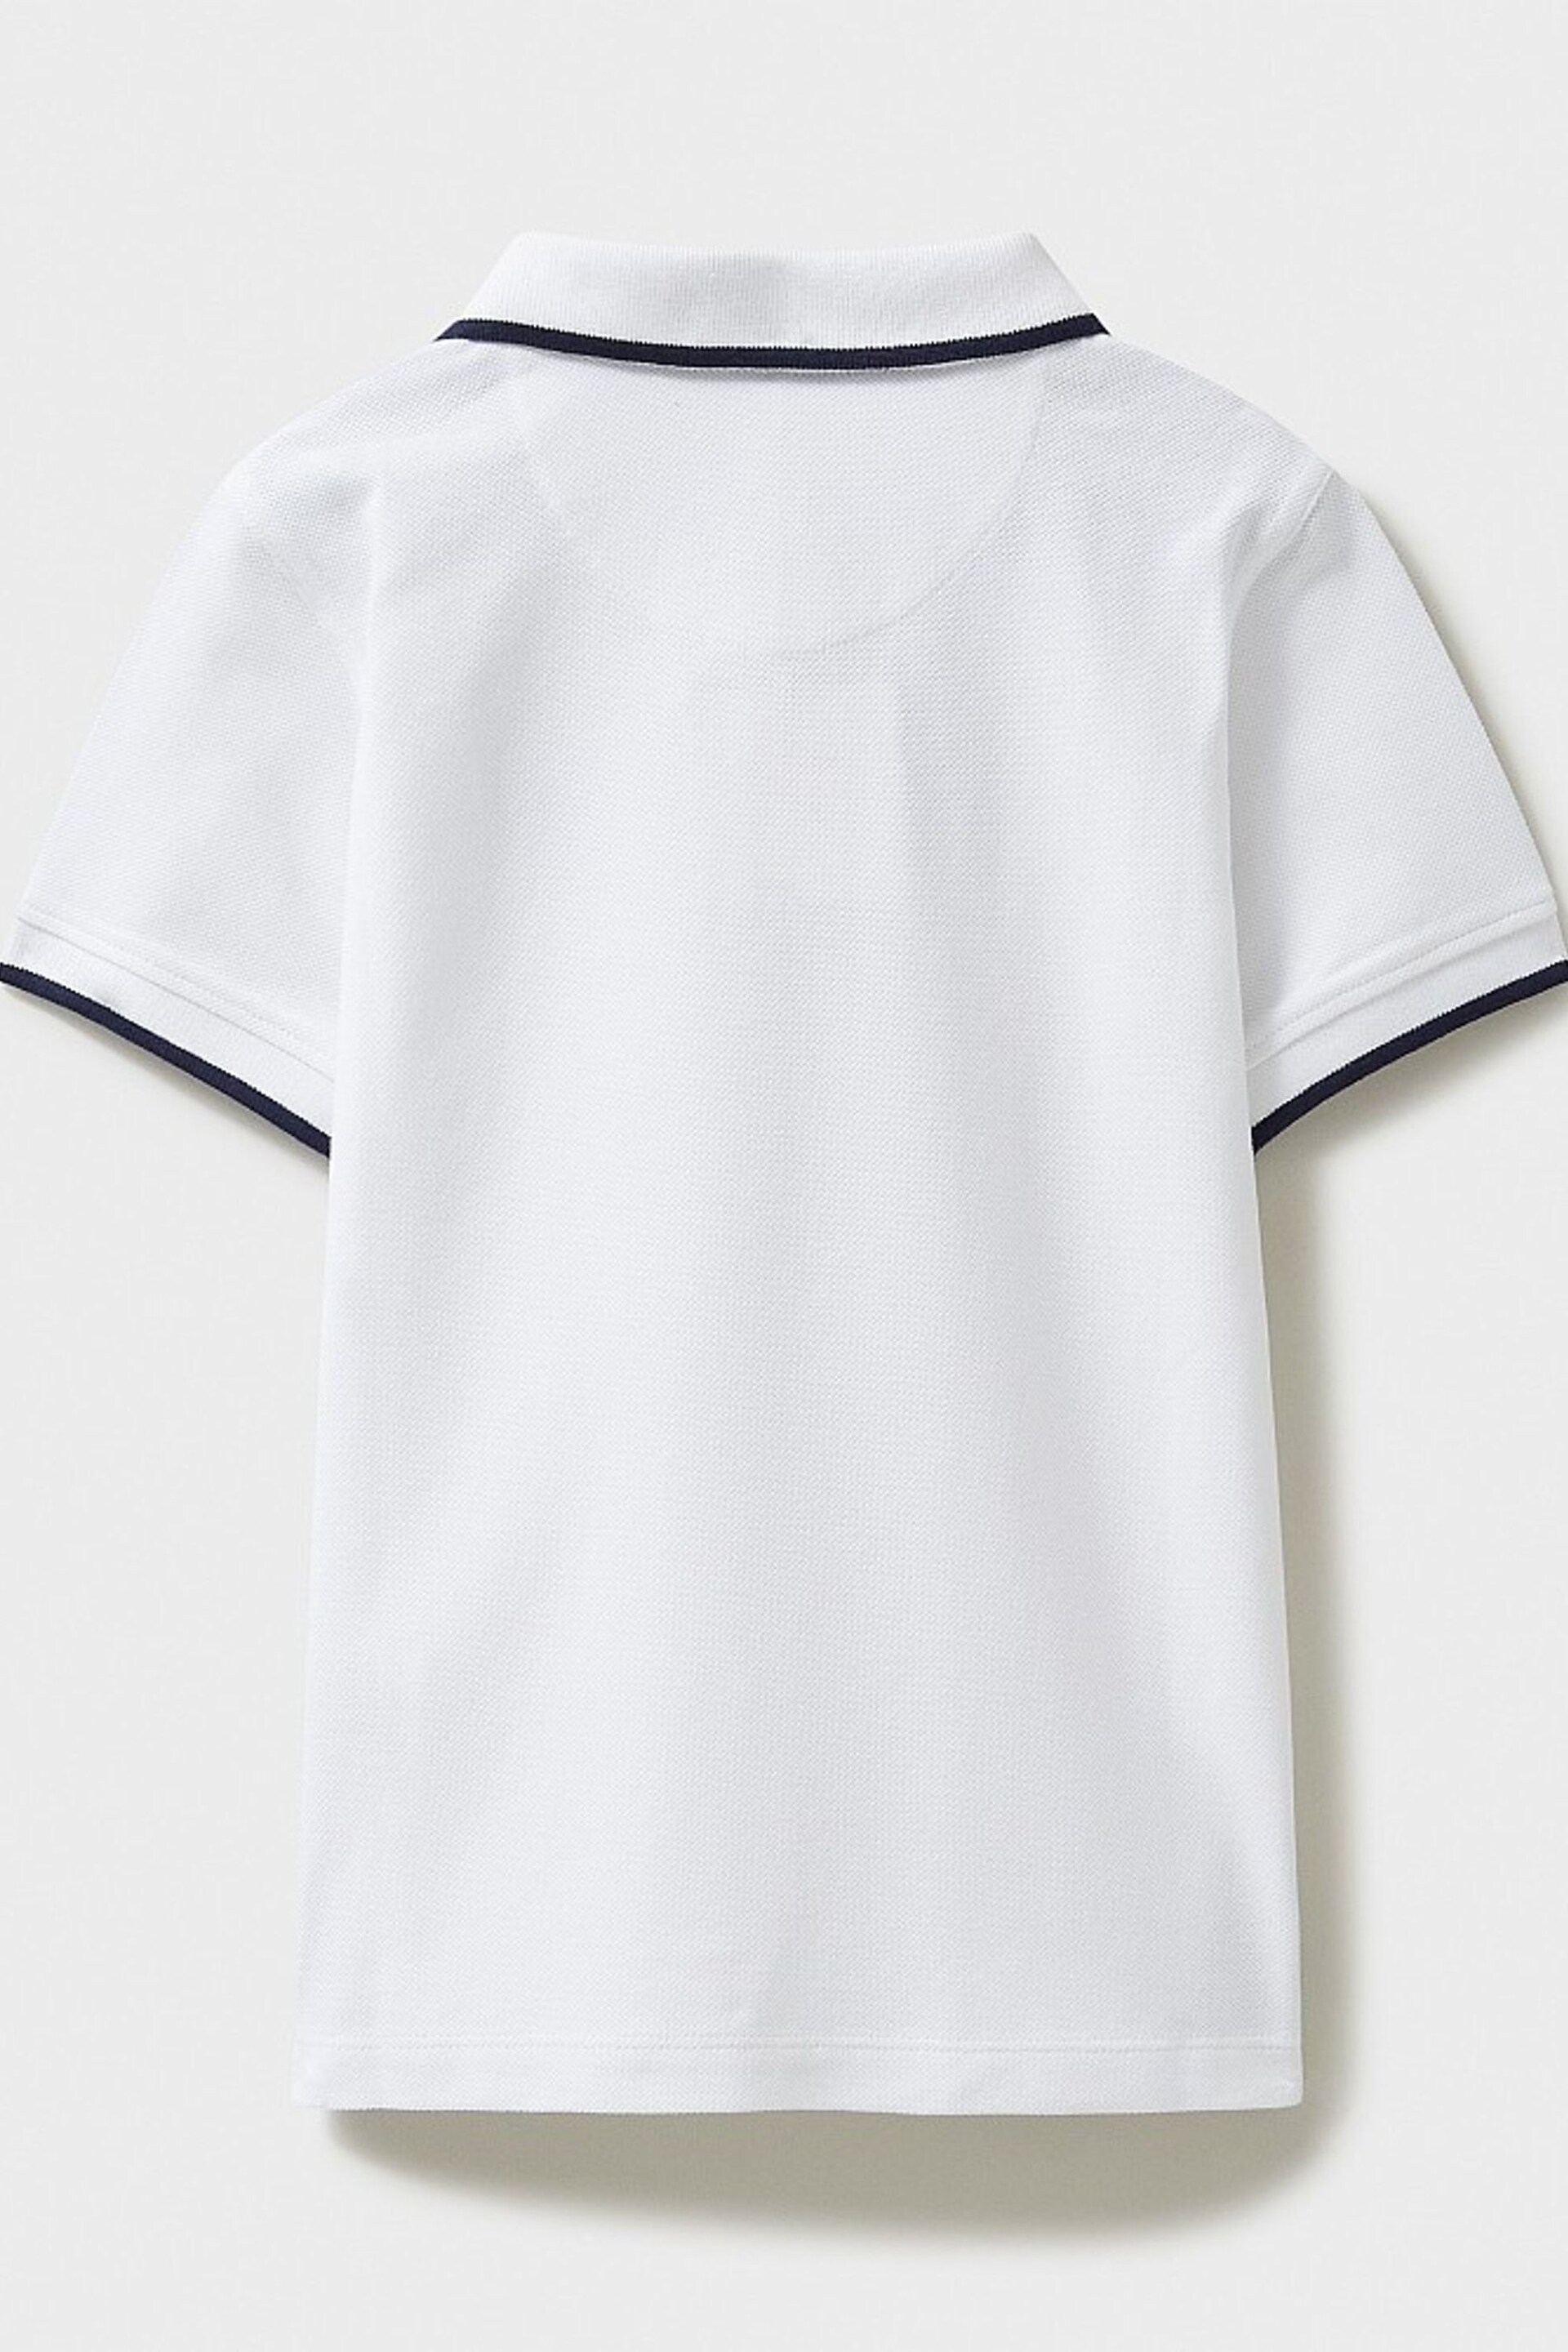 Crew Clothing Tipped Pique Short Sleeve Polo Shirt - Image 4 of 5